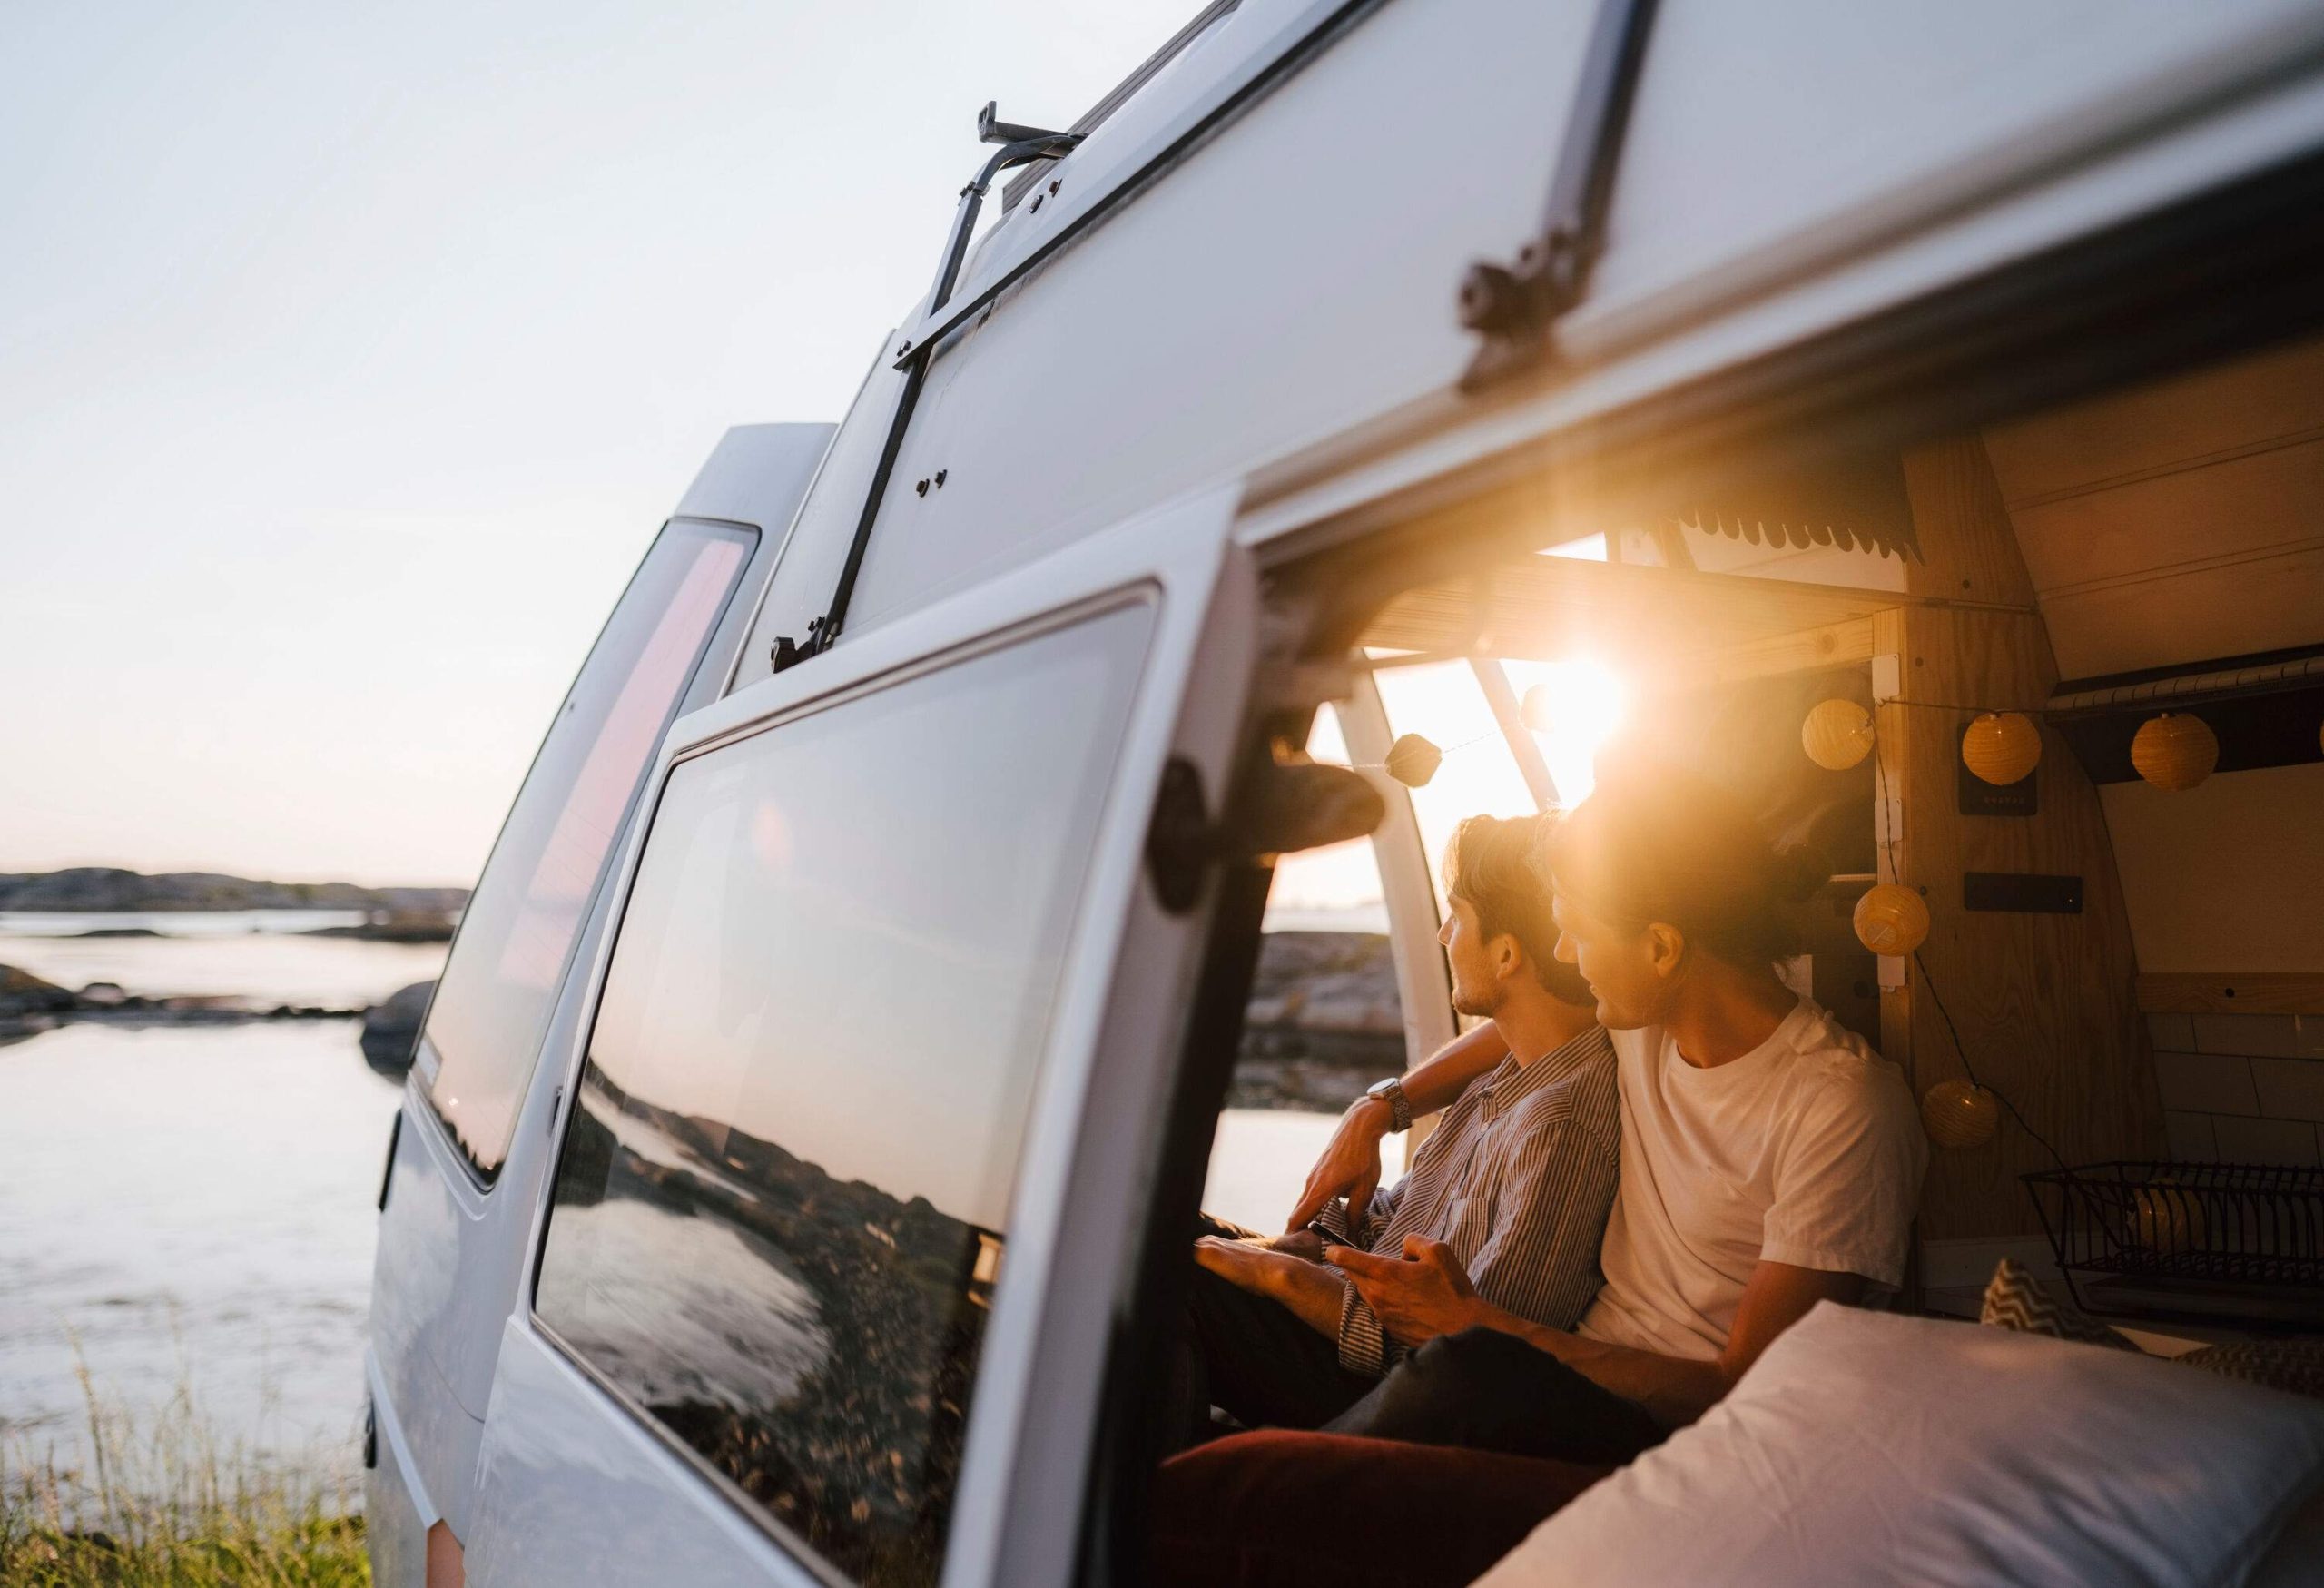 Male couple sit in a camper van, one of them placing his arm around the other's shoulder as they look out the window at the surroundings.